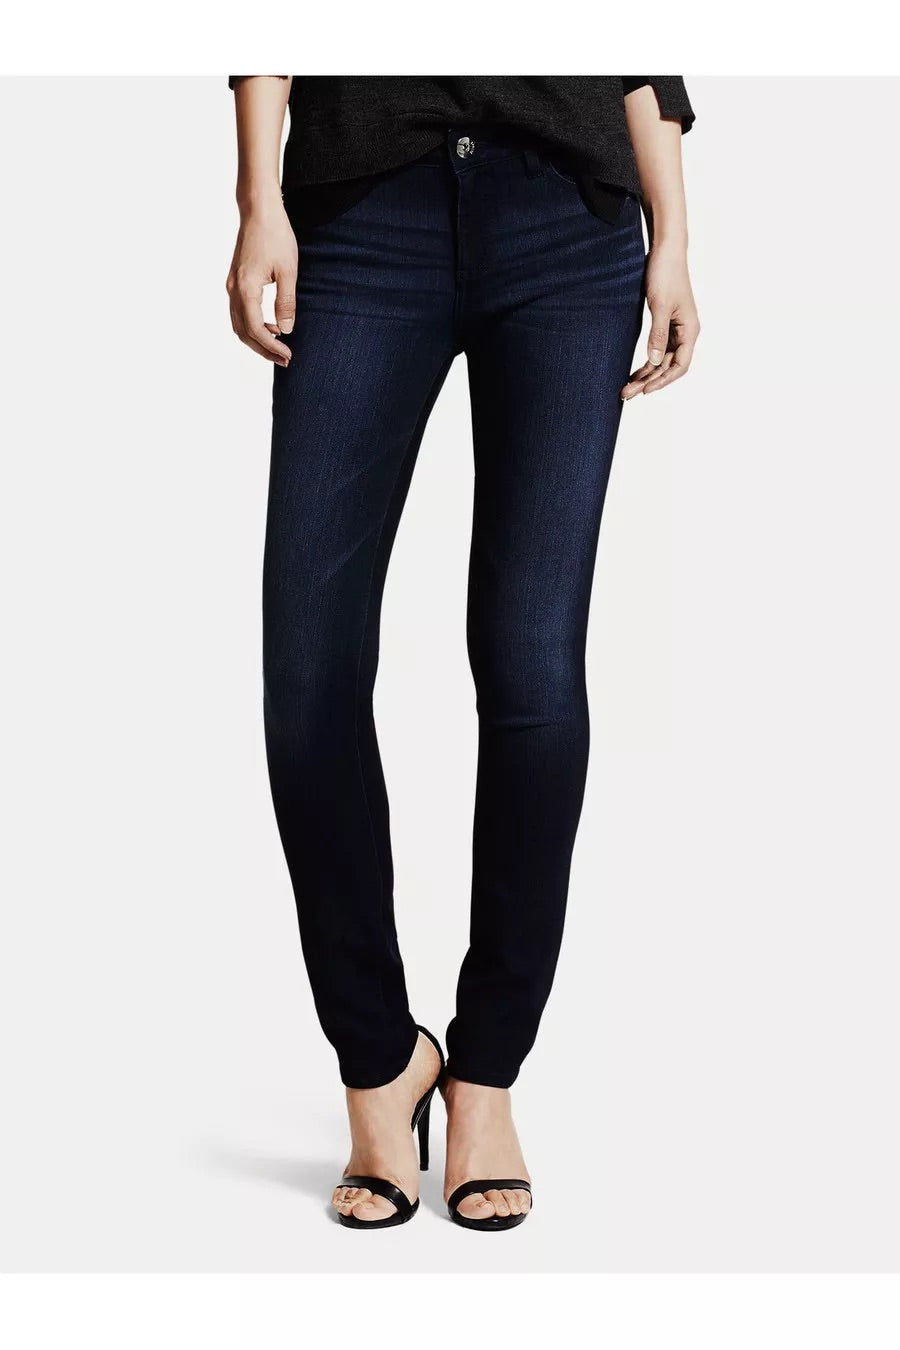 Florence Mid-Rise Instasculpt Skinny Jean in Wooster by DL 1961